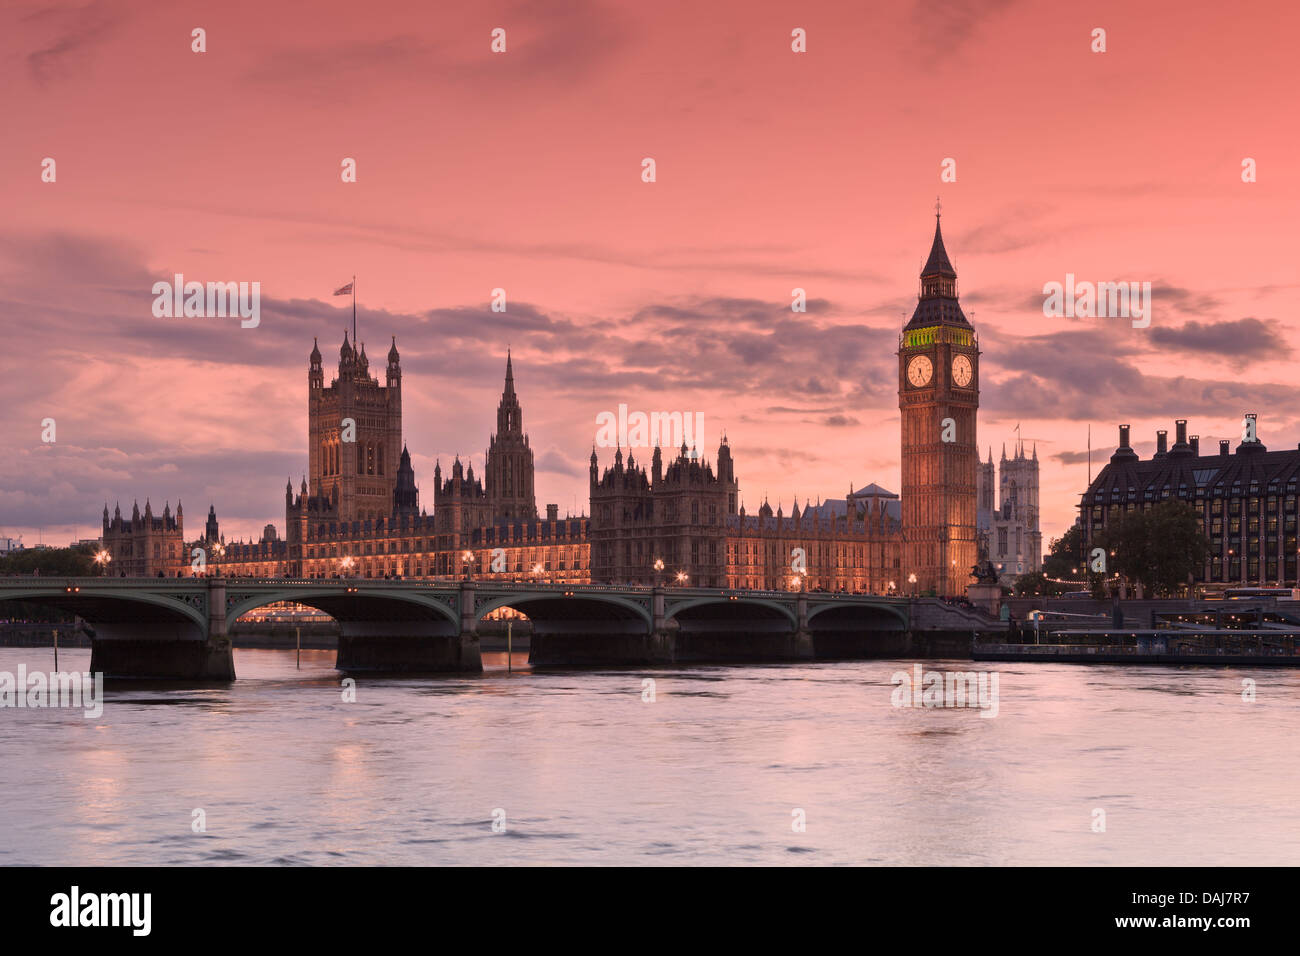 The houses of parliament at night, London, UK Stock Photo